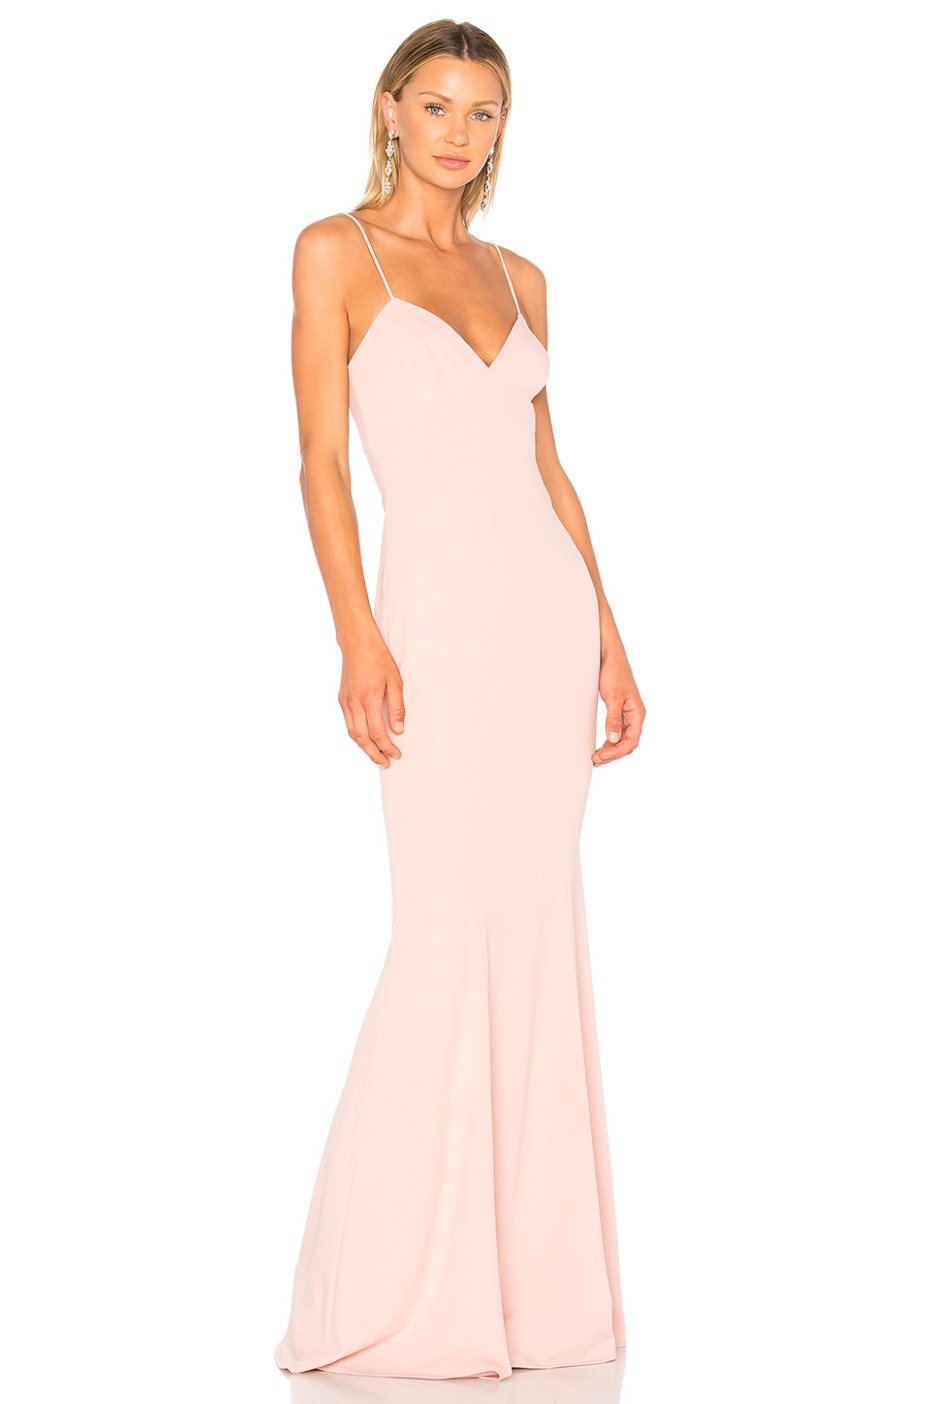 katie-may-luna-gown-in-dusty-rose